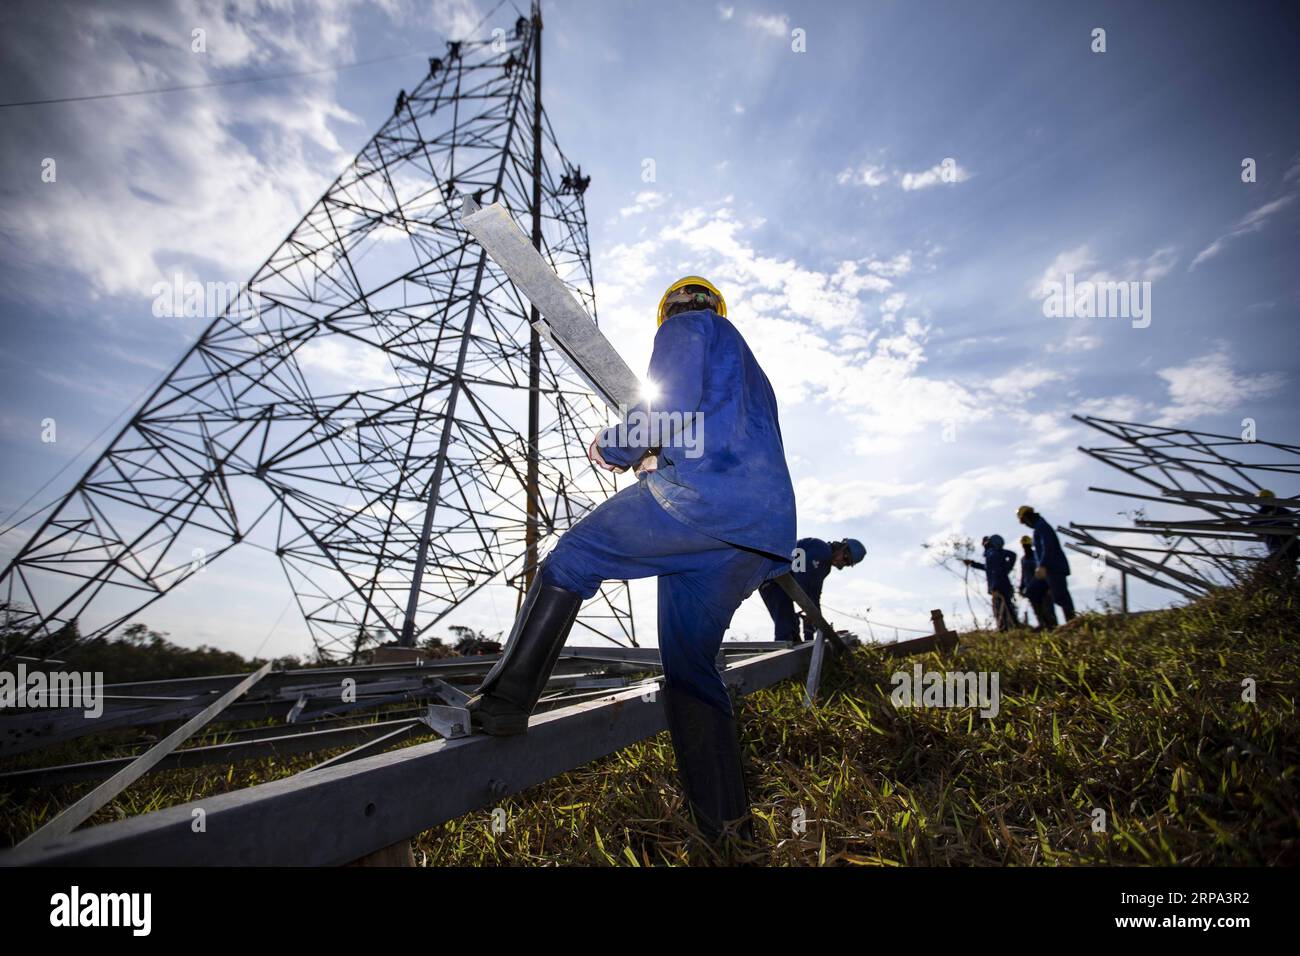 (190424) -- BEIJING, April 24, 2019 (Xinhua) -- Works are seen at a site for the ultra-high voltage electricity transmission project at the Belo Monte hydroelectric dam in Brazil, on Aug. 7, 2018. (Xinhua/Li Ming) (BRF) Xinhua Headlines: BRIng smiles on more faces PUBLICATIONxNOTxINxCHN Stock Photo